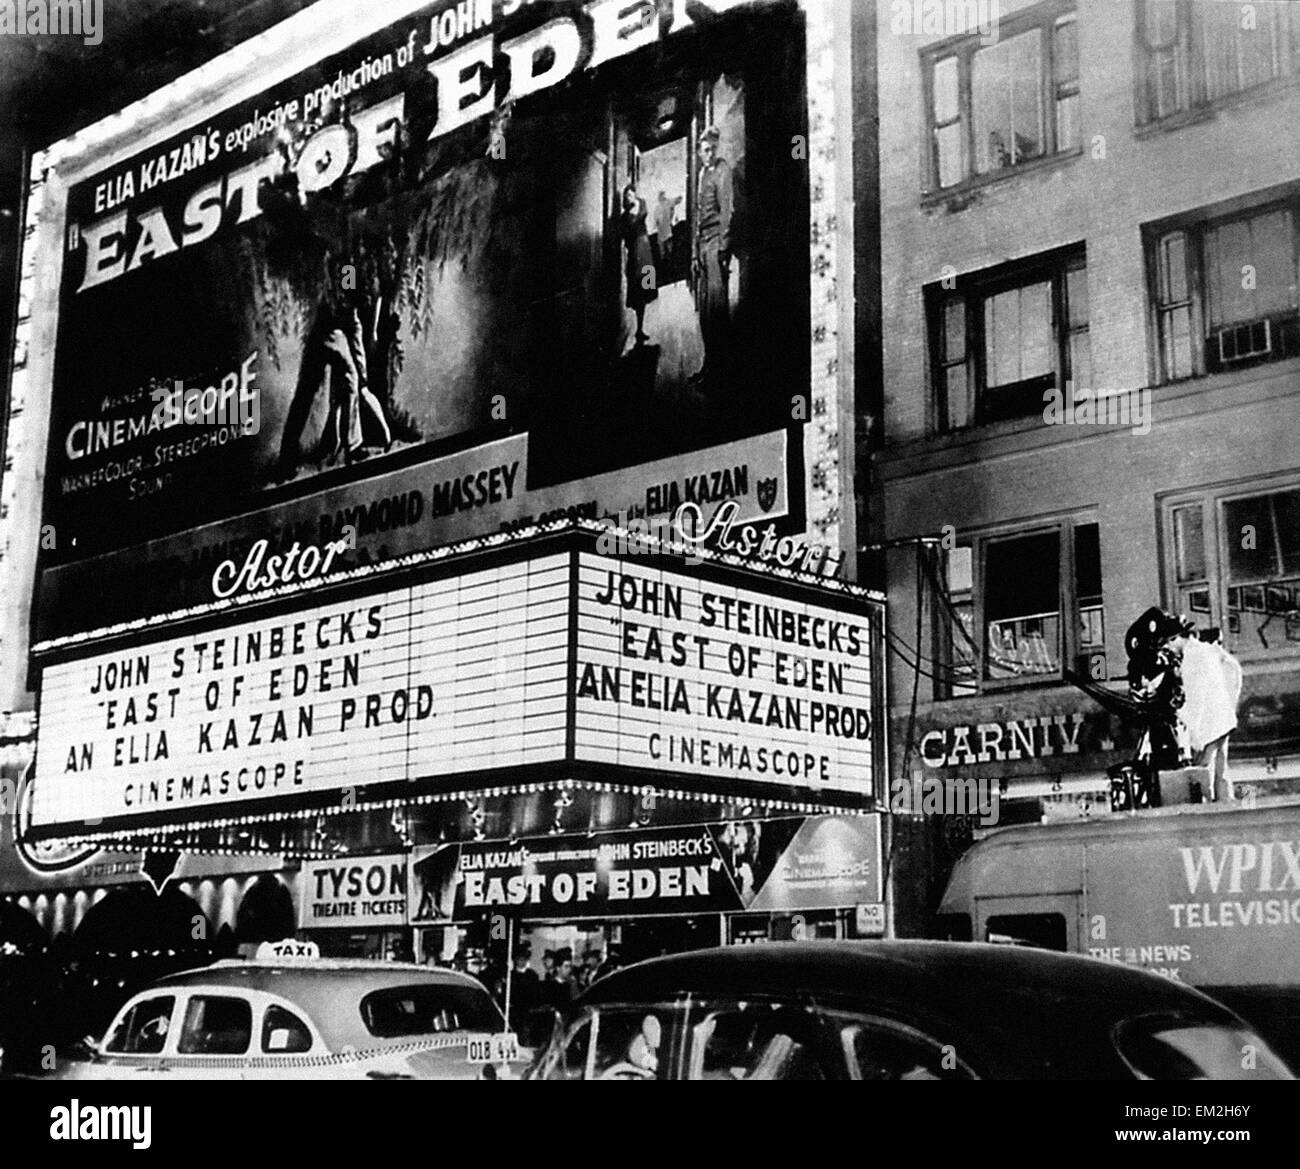 East of Eden - Movie Poster Stock Photo